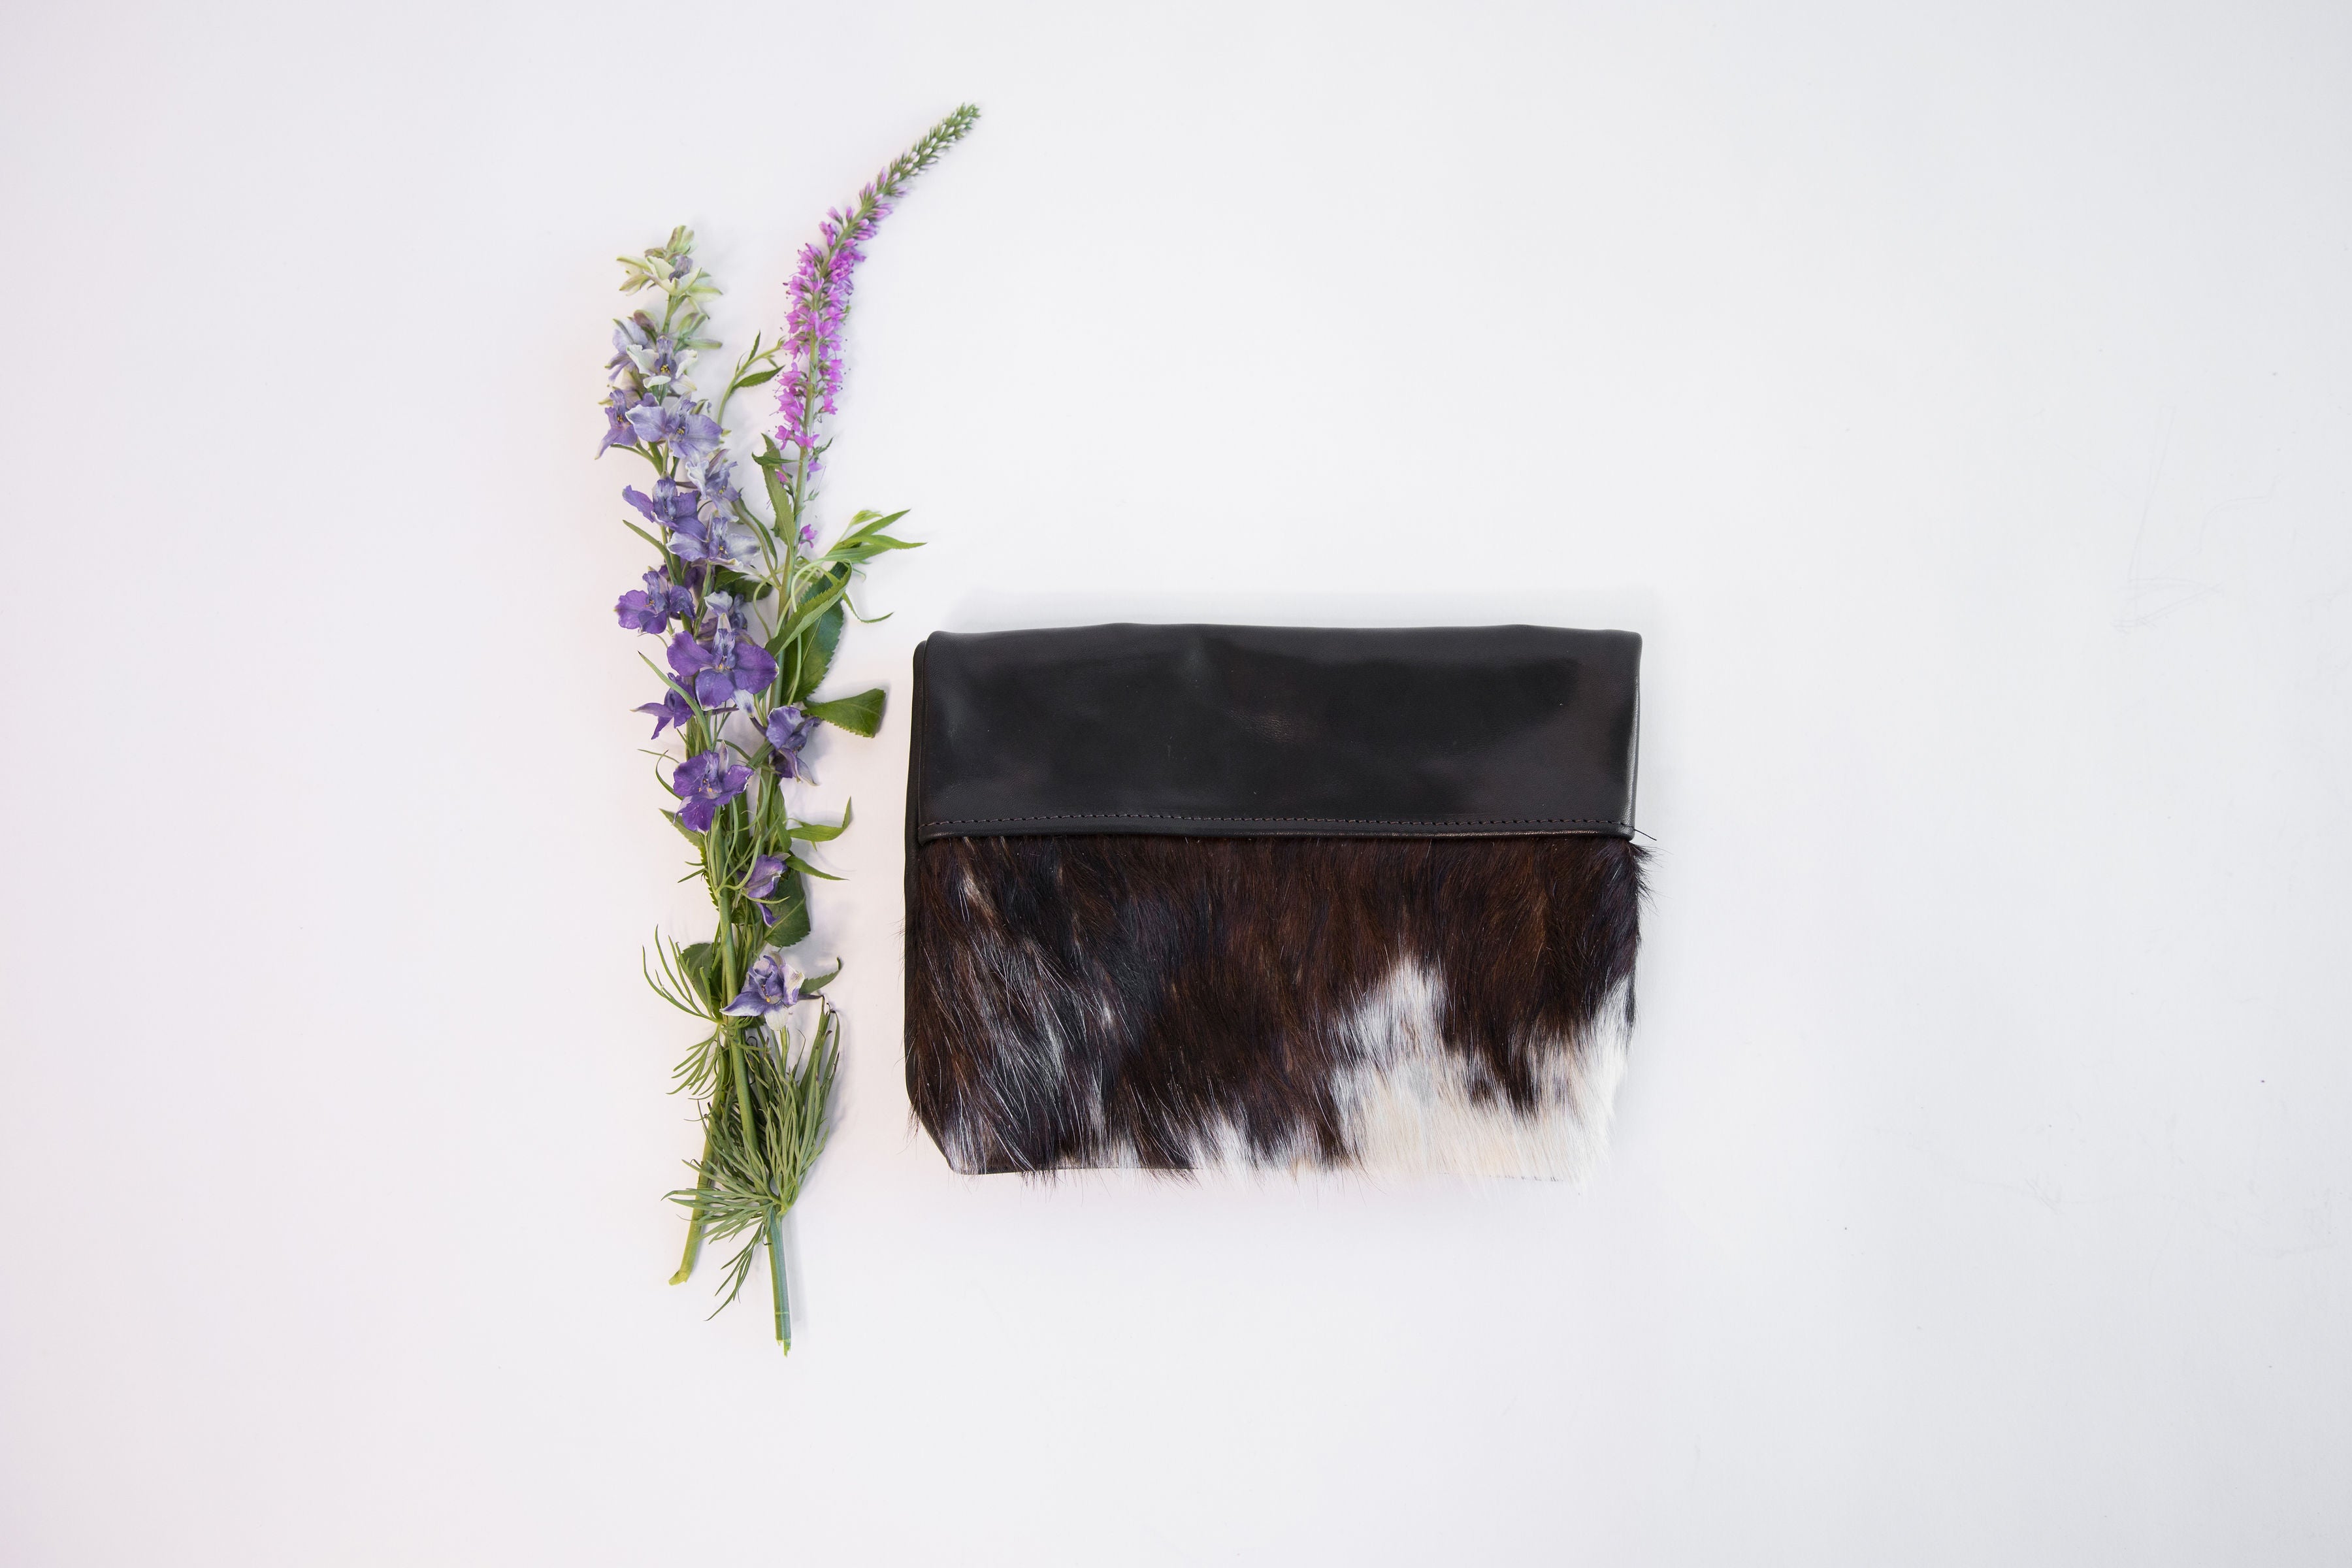 Foldover Leather Clutch – Alex & Andrew Bag Co.